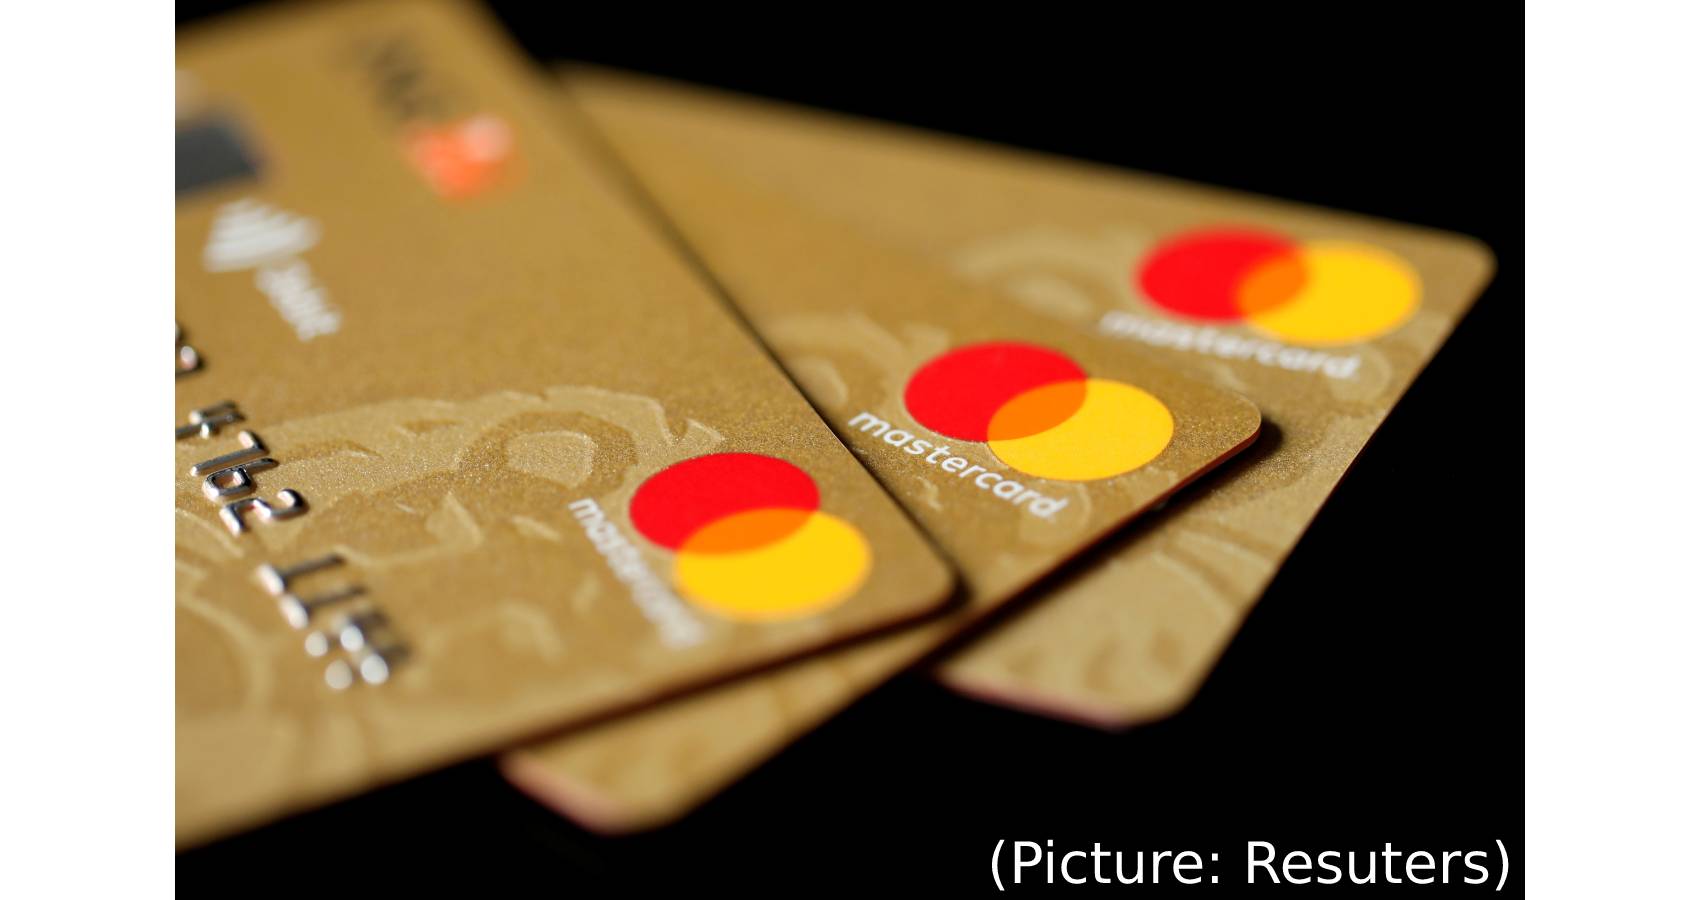 India Bans Mastercard From Issuing New Cards In Data Storage Row